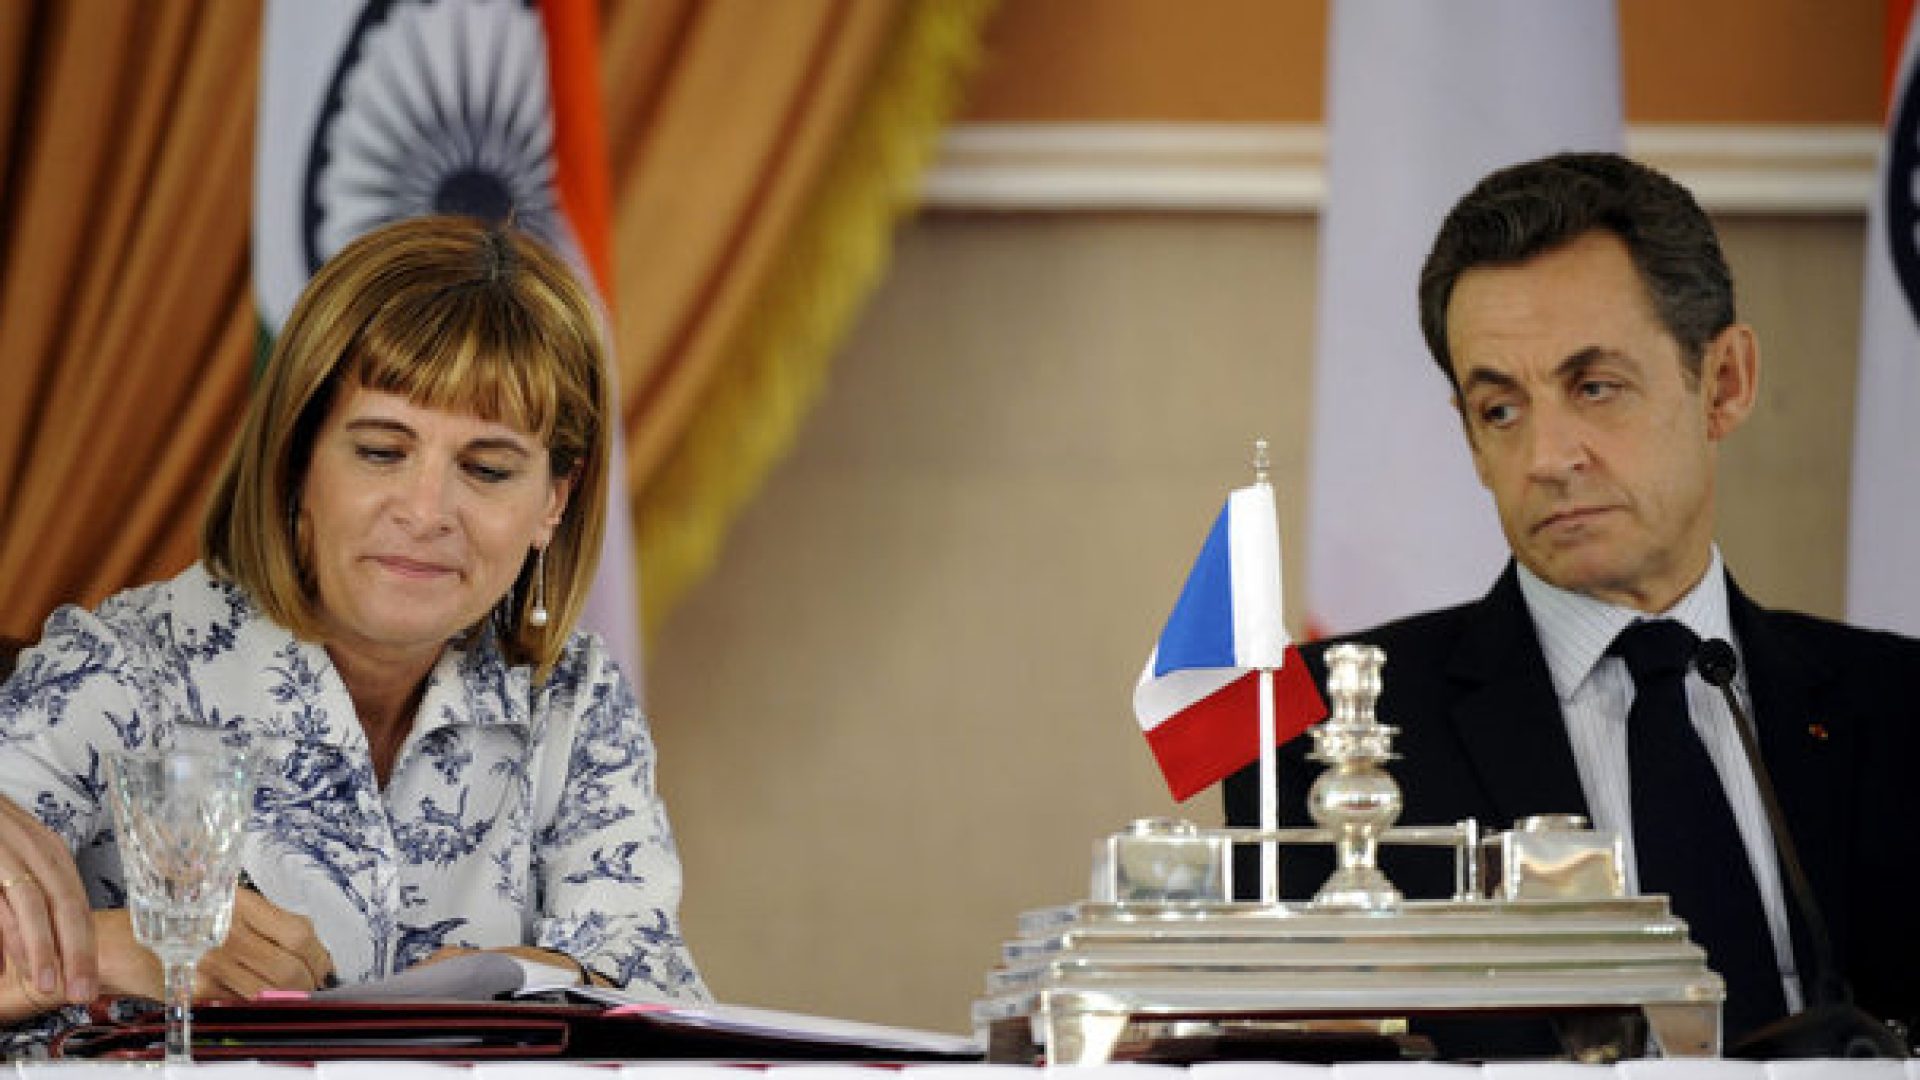 France's President Sarkozy watches as Areva's CEO Lauvergeon signs documents at Hyderabad House in New Delhi